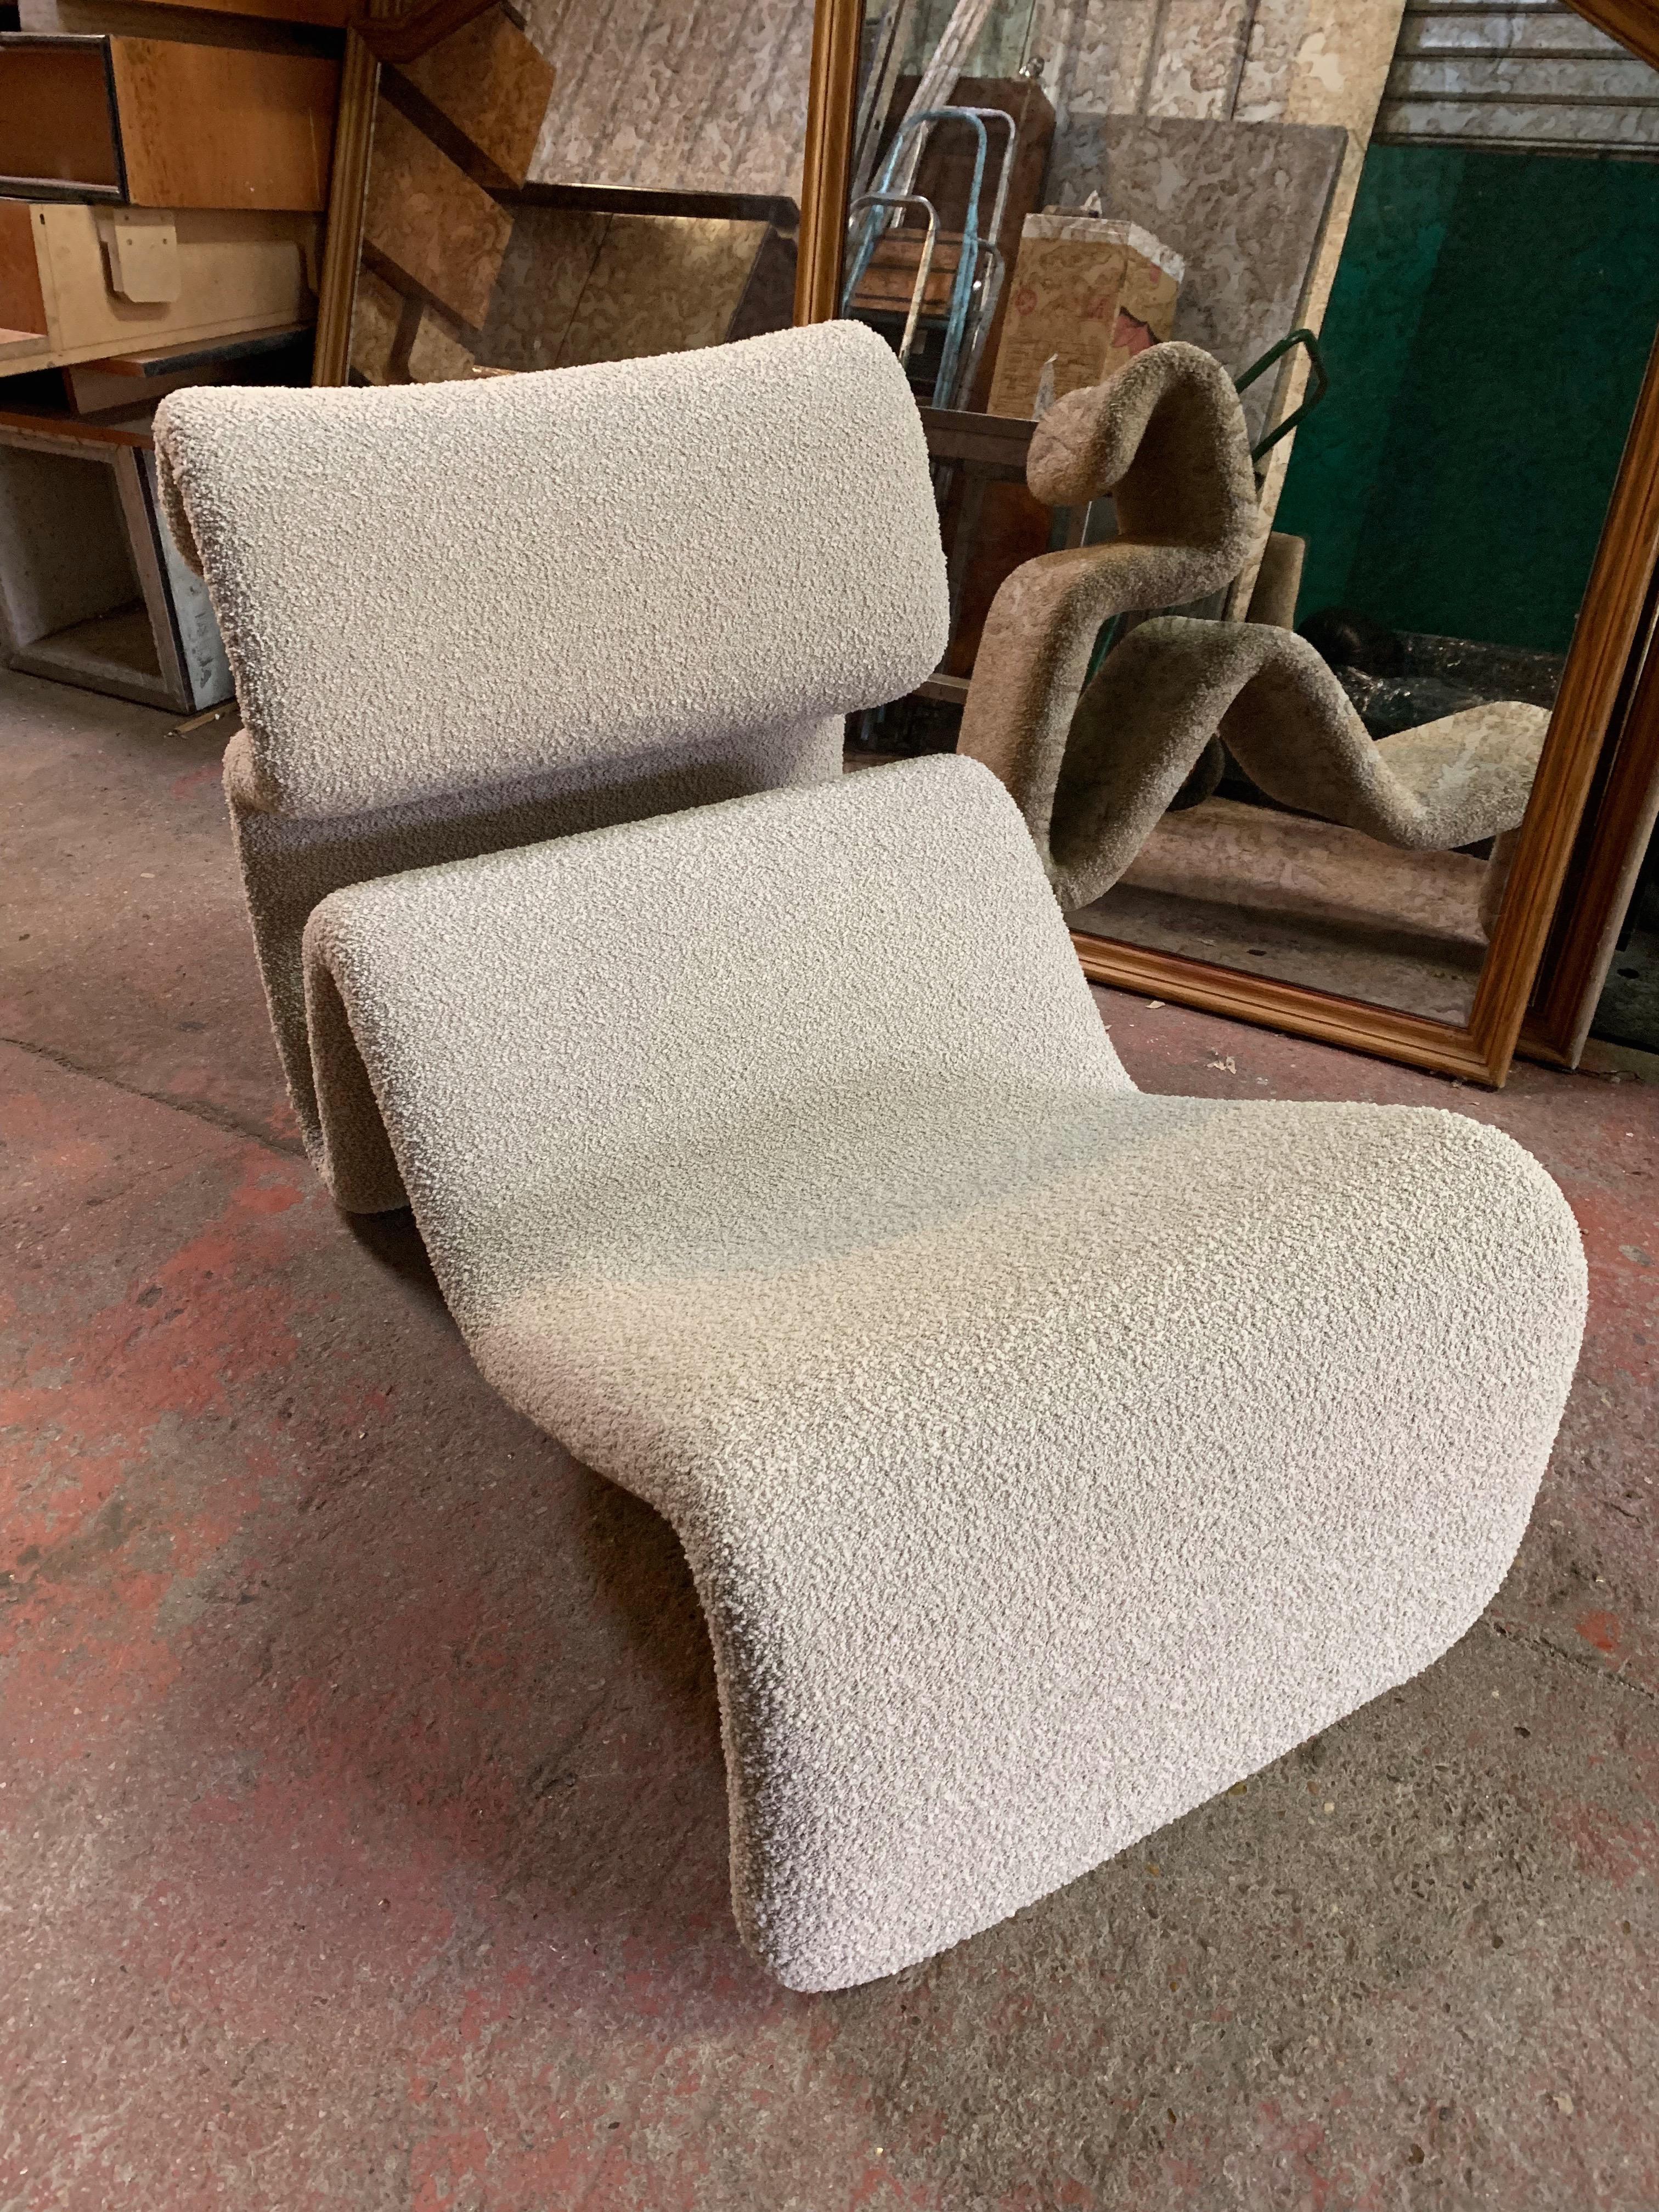 Etcetera model of lounge chairs or armchairs by the Swedish designer Jan Ekselius. Original 1970s edition fully upholstered with a very nice fabric from Bisson Bruneel. Famous design like Paulin, Etienne Henri Martin, Knoll, Scarpa, Cassina, Olivier